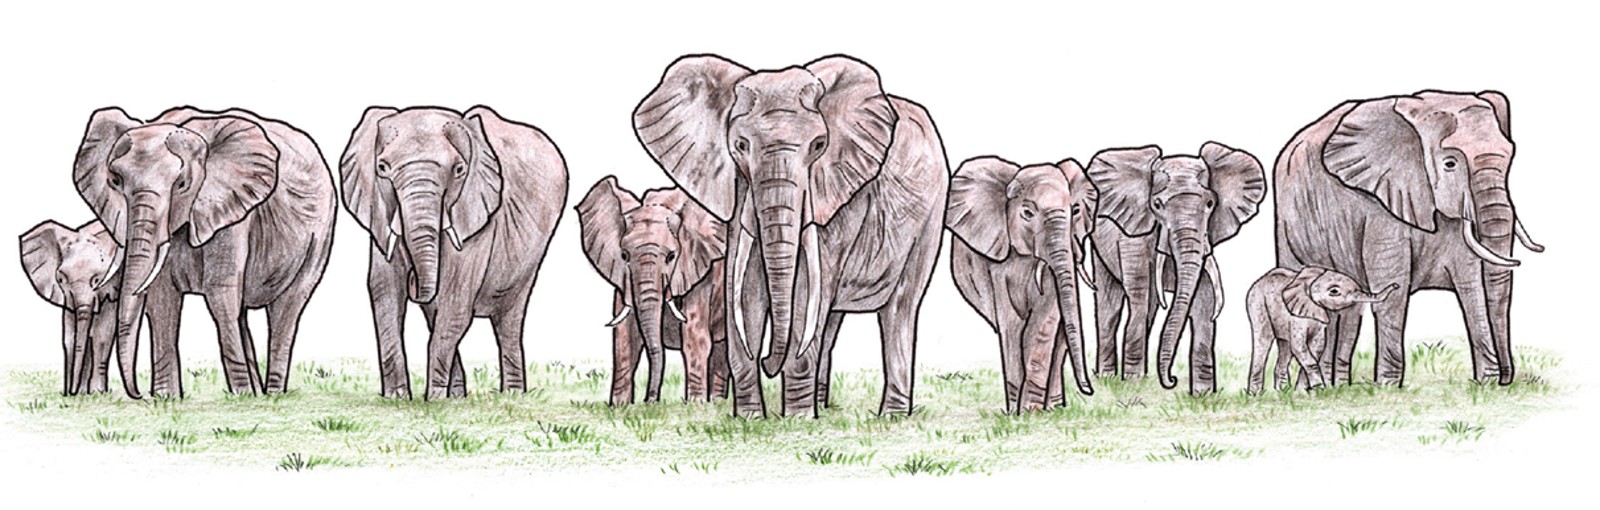 An illustration showing a family of elephants.